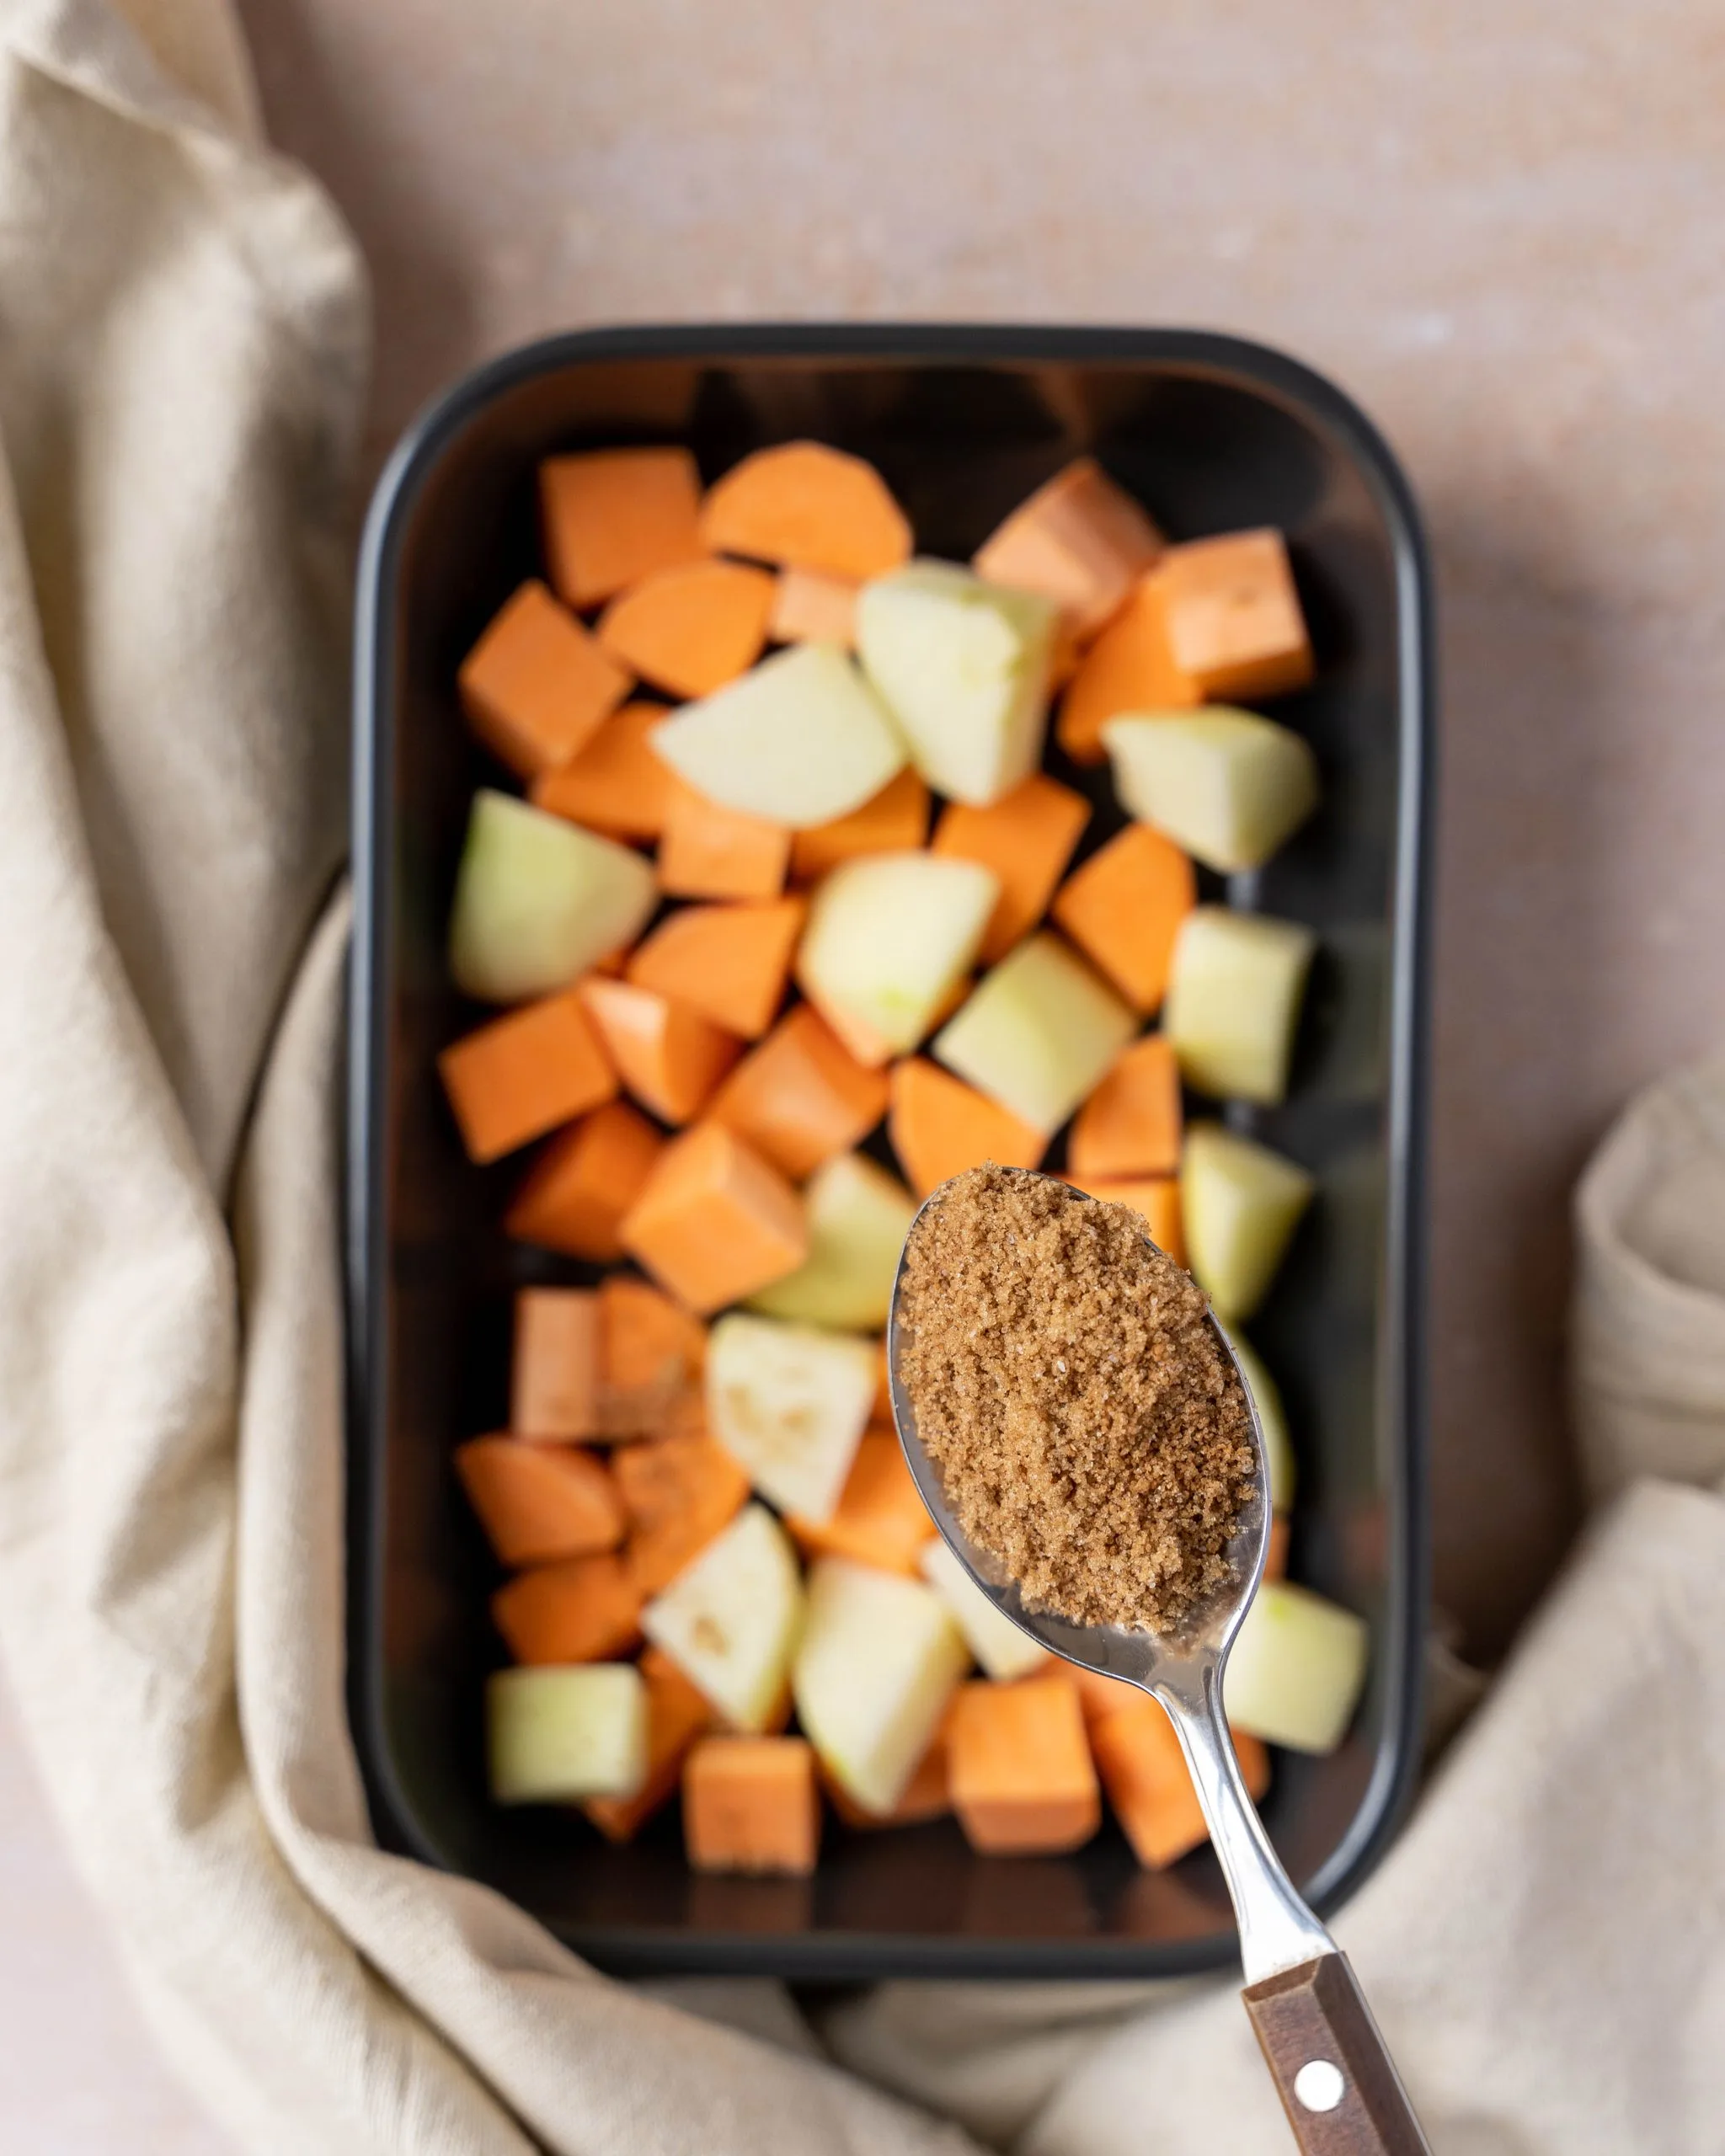 A spoon of brown sugar topping hovering over diced apples and sweet potatoes